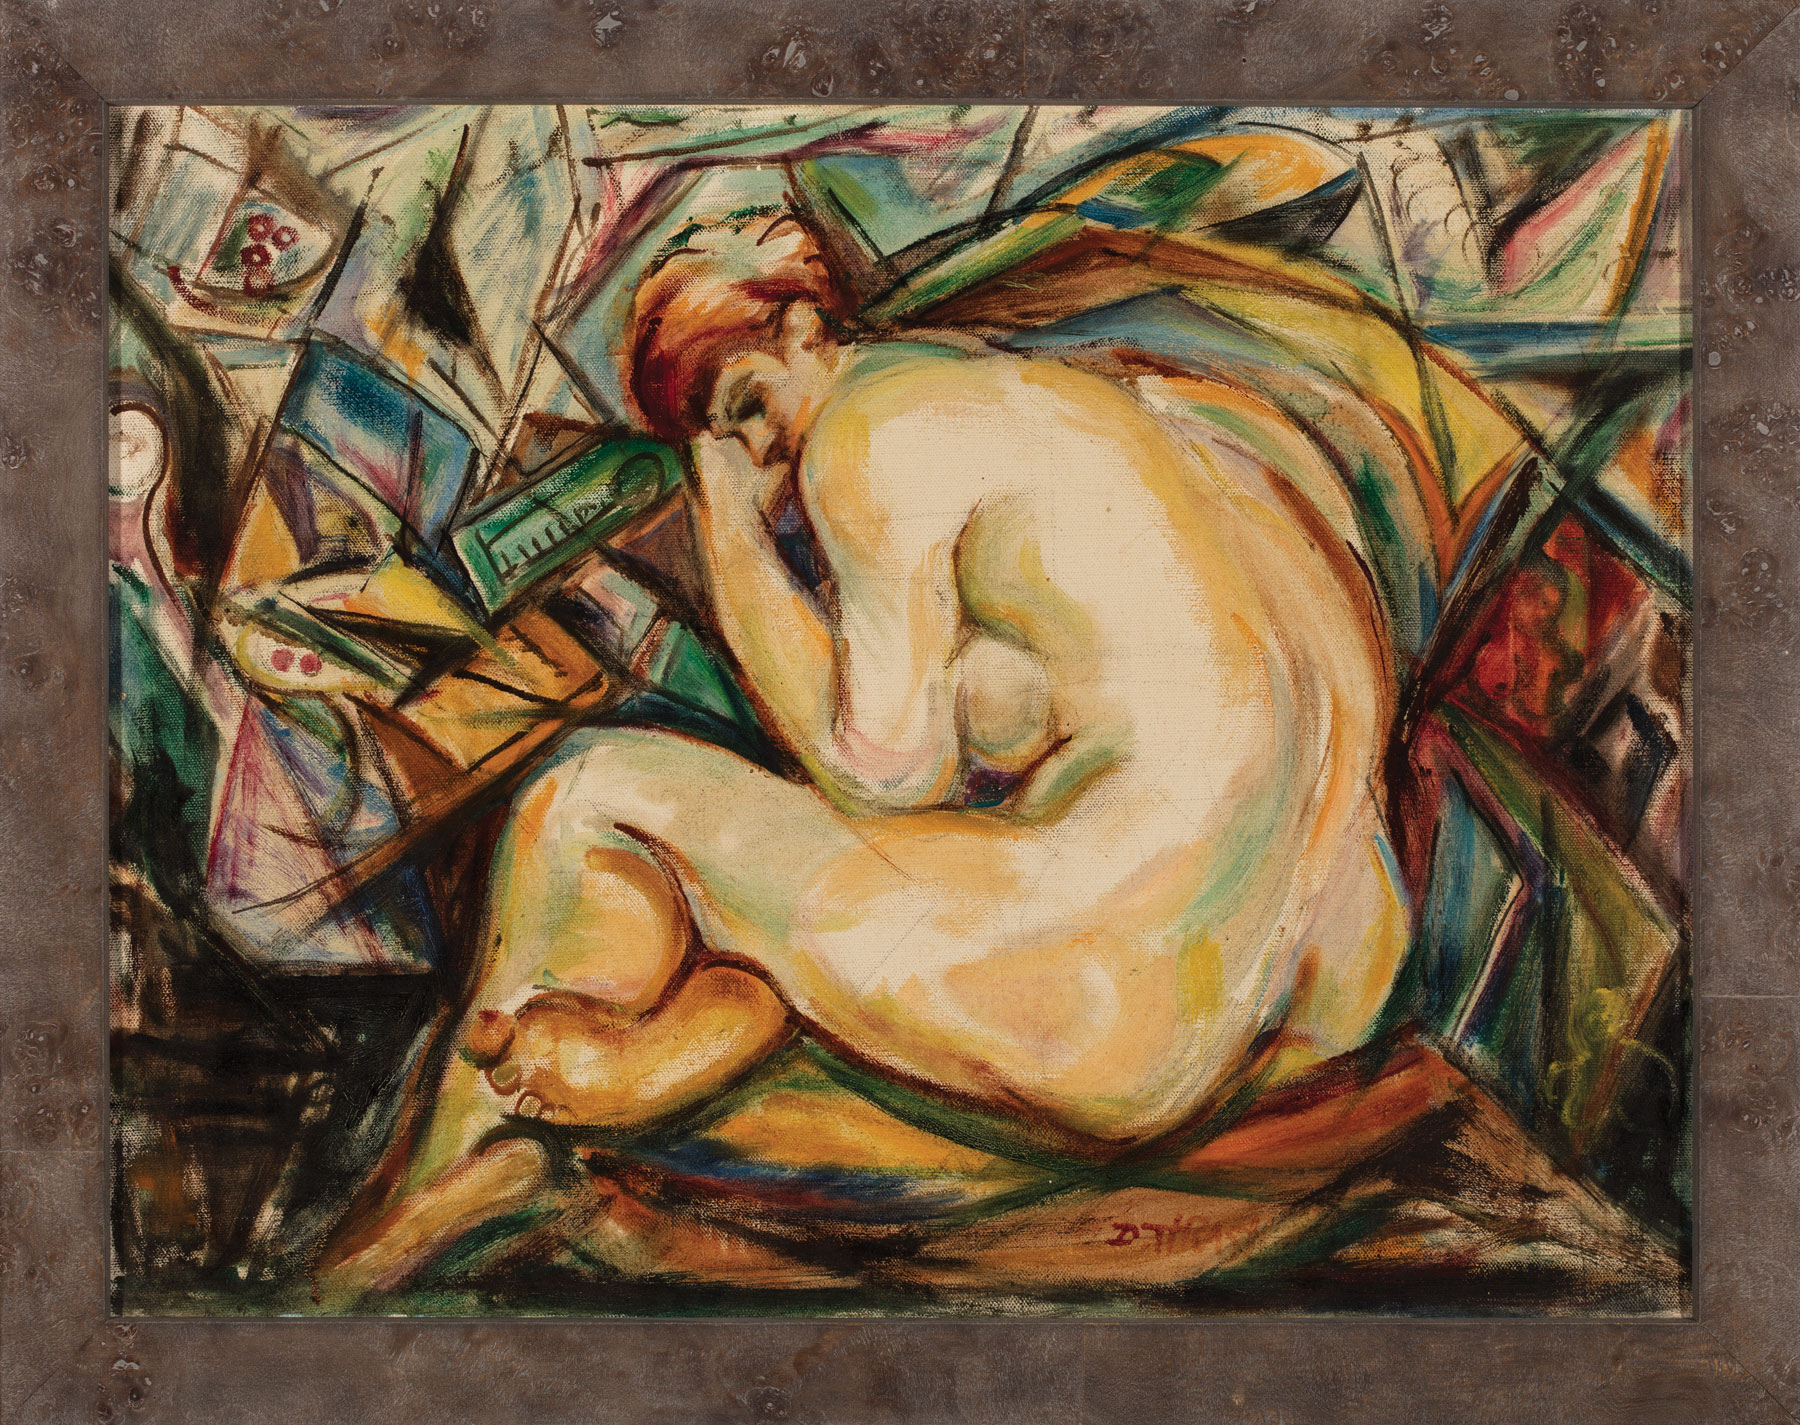 Dox Thrash (American/Pennsylvania, 1893-1965), "Nude in a Cubist Composition", oil on canvas, signed